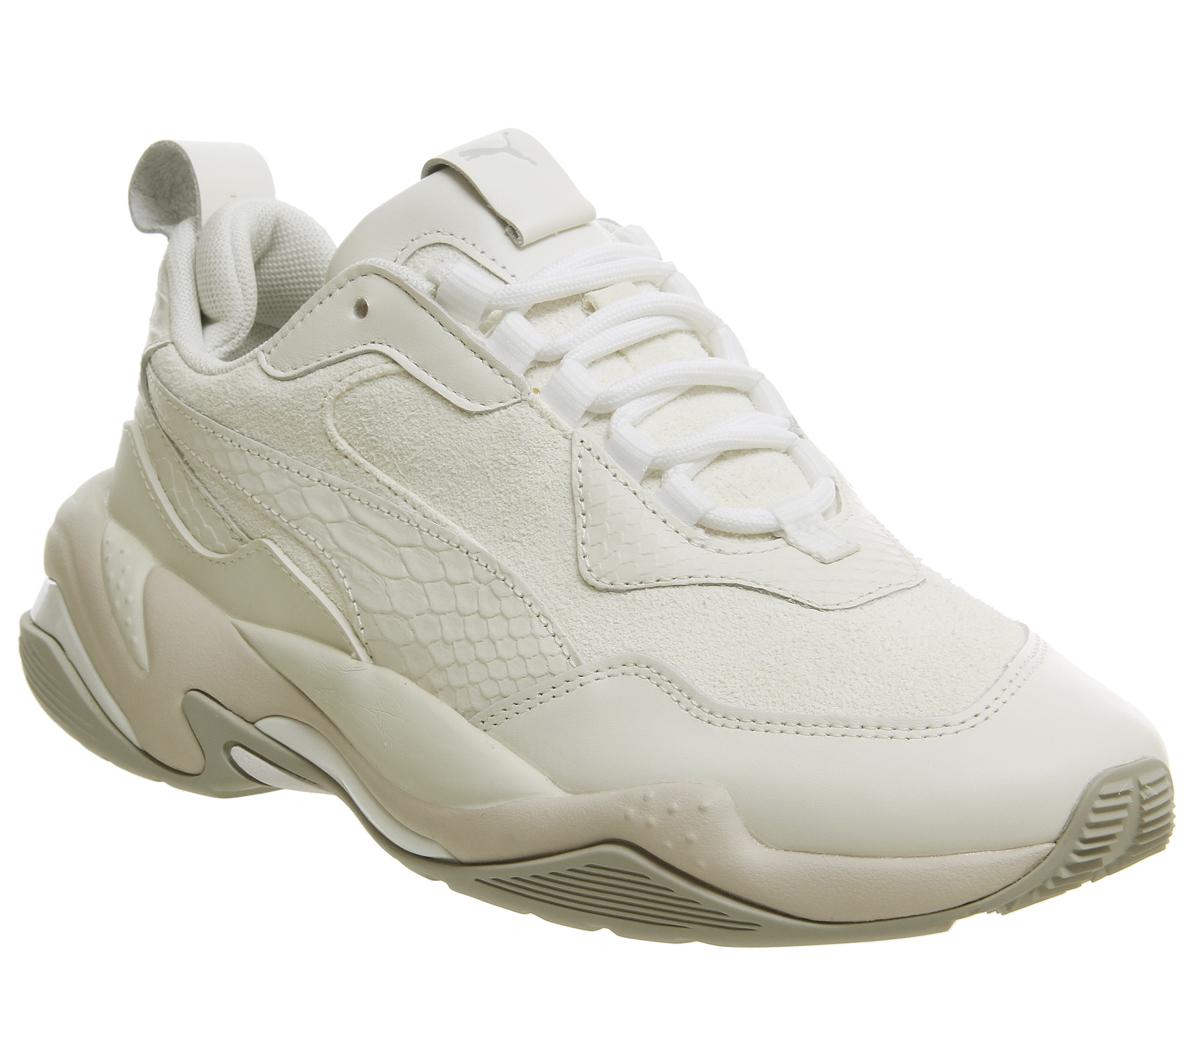 Puma Thunder Desert Trainers Bright White Star Grey Violet His Trainers